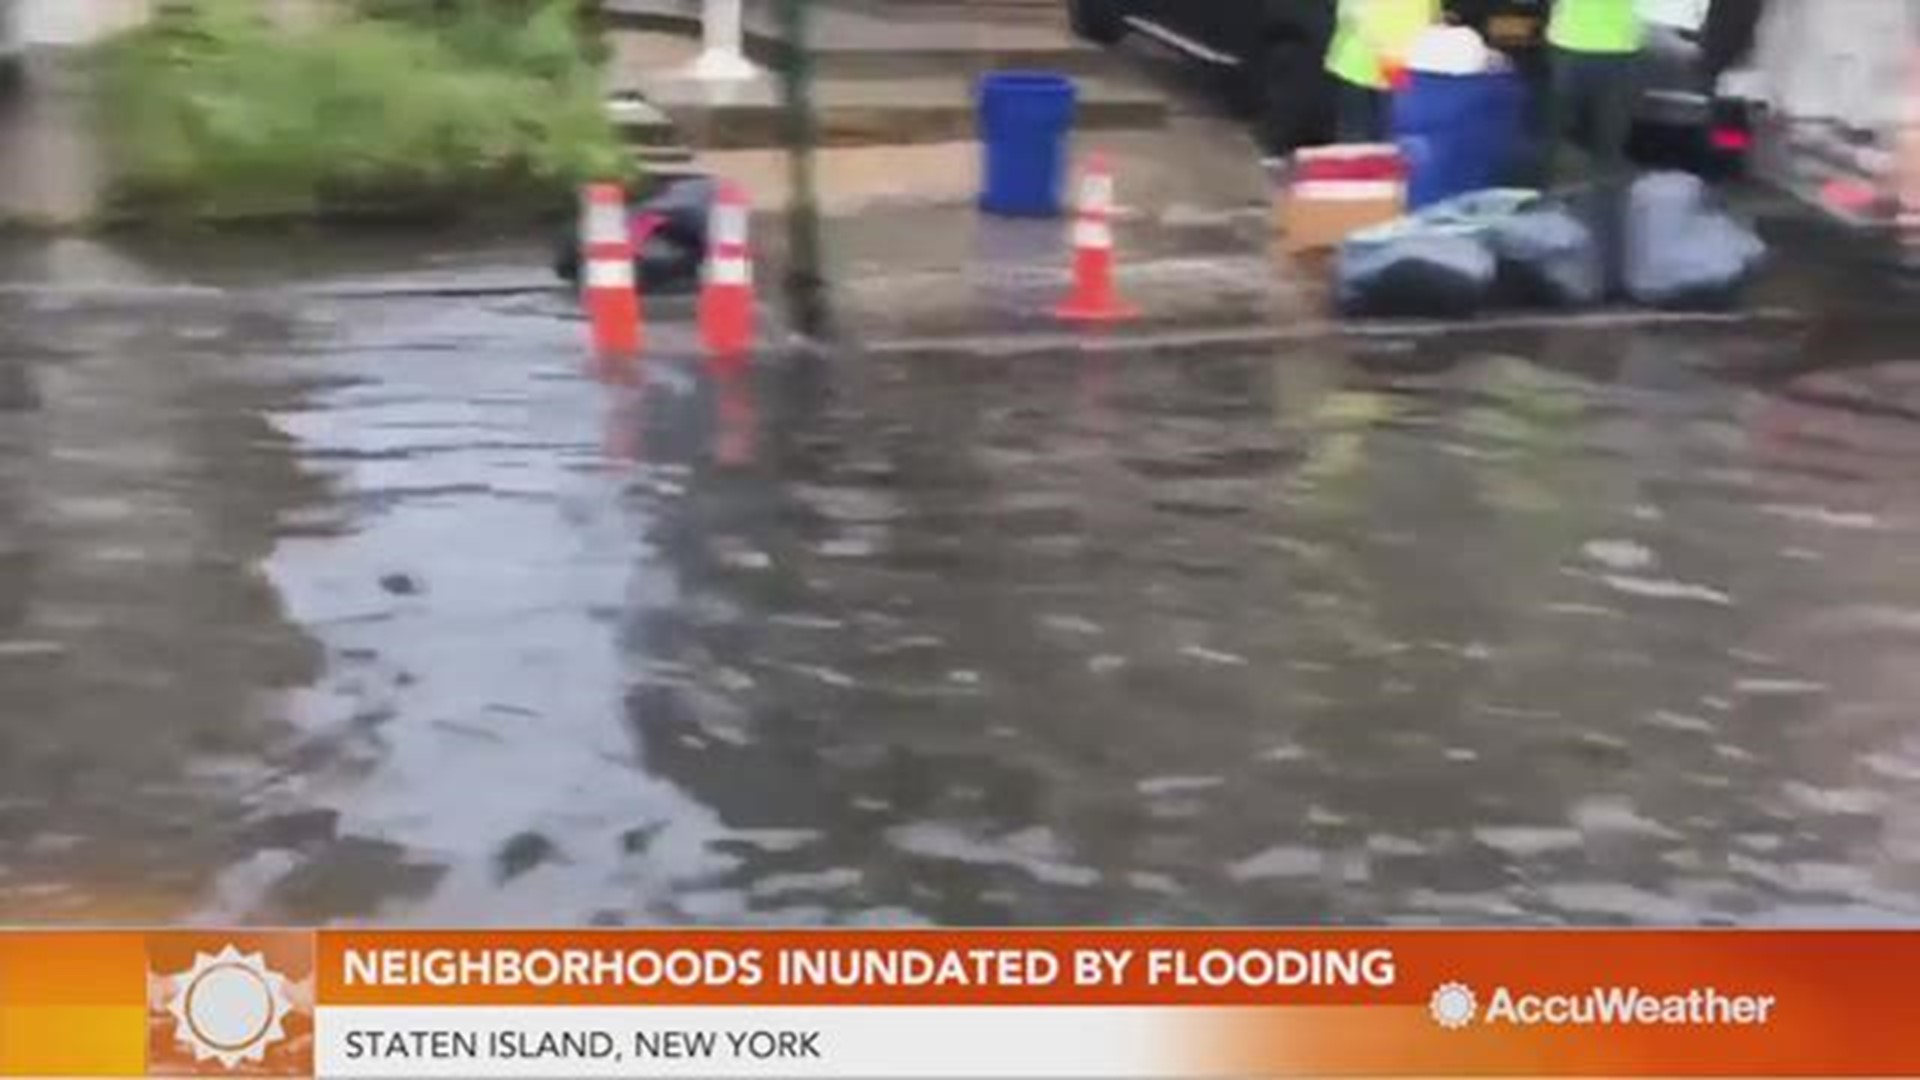 AccuWeather reporter Dexter Henry spoke to some residents of Staten Island, New York, who are dealing with significant street flooding across several neighborhoods.